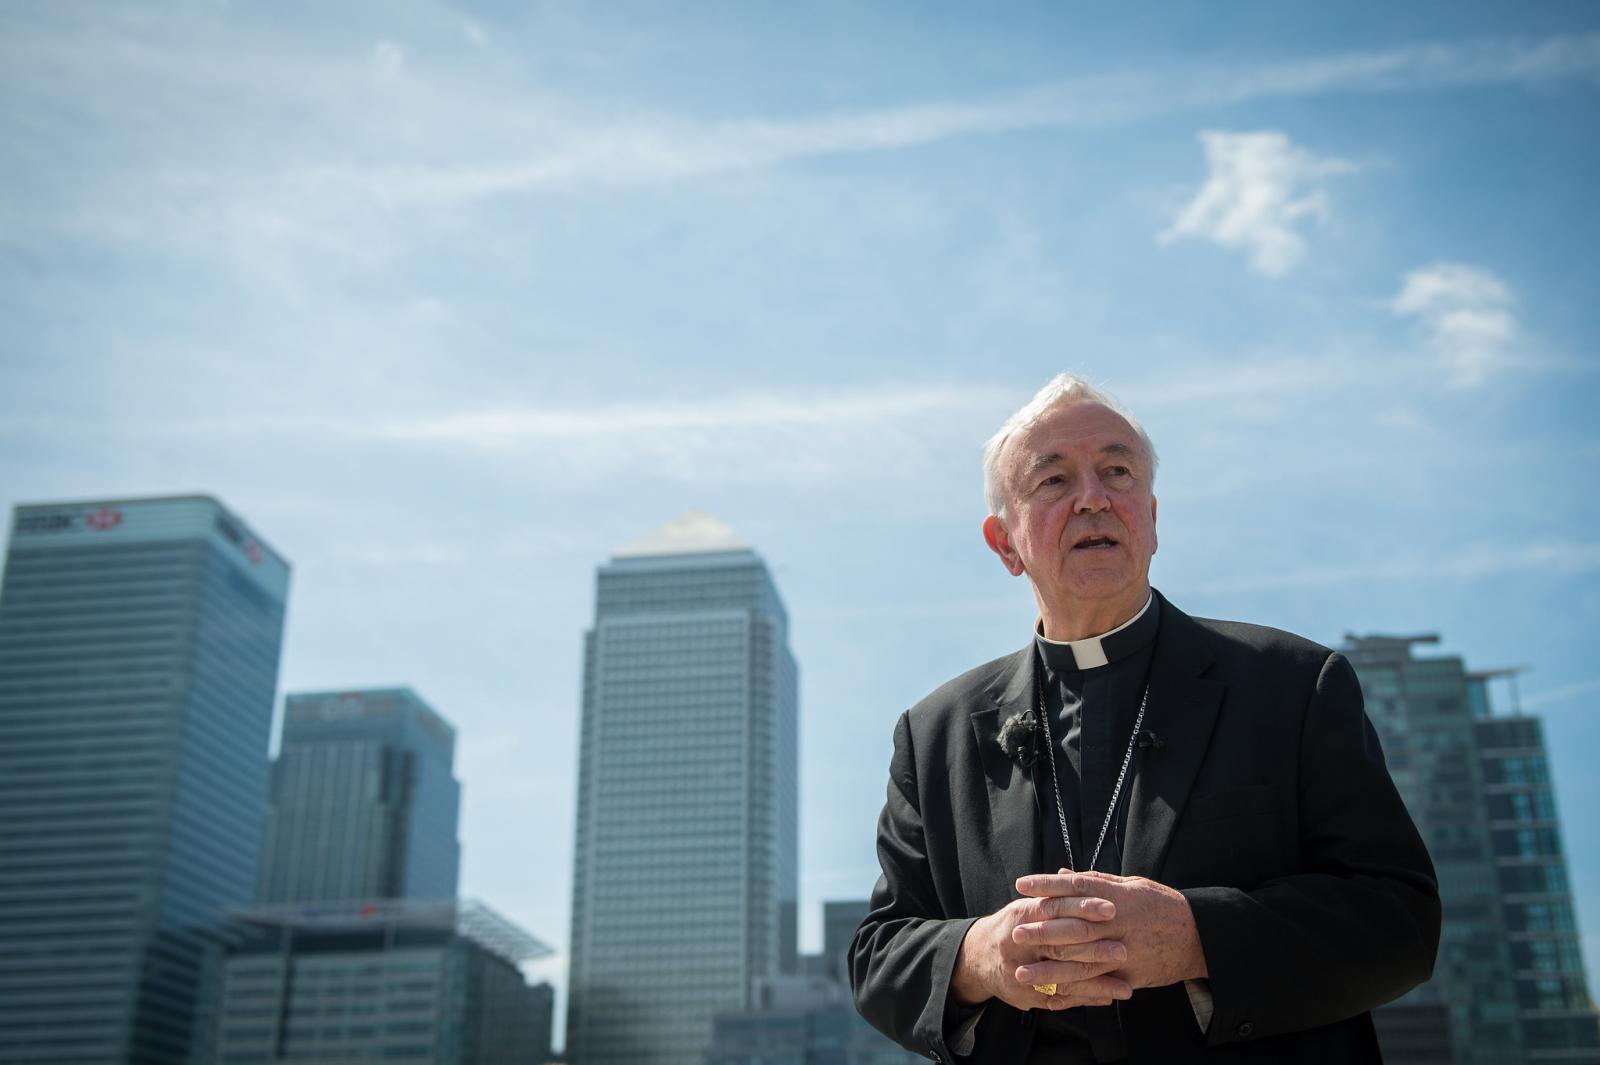 Cardinal expresses concern about overseas aid reduction - Diocese of Westminster